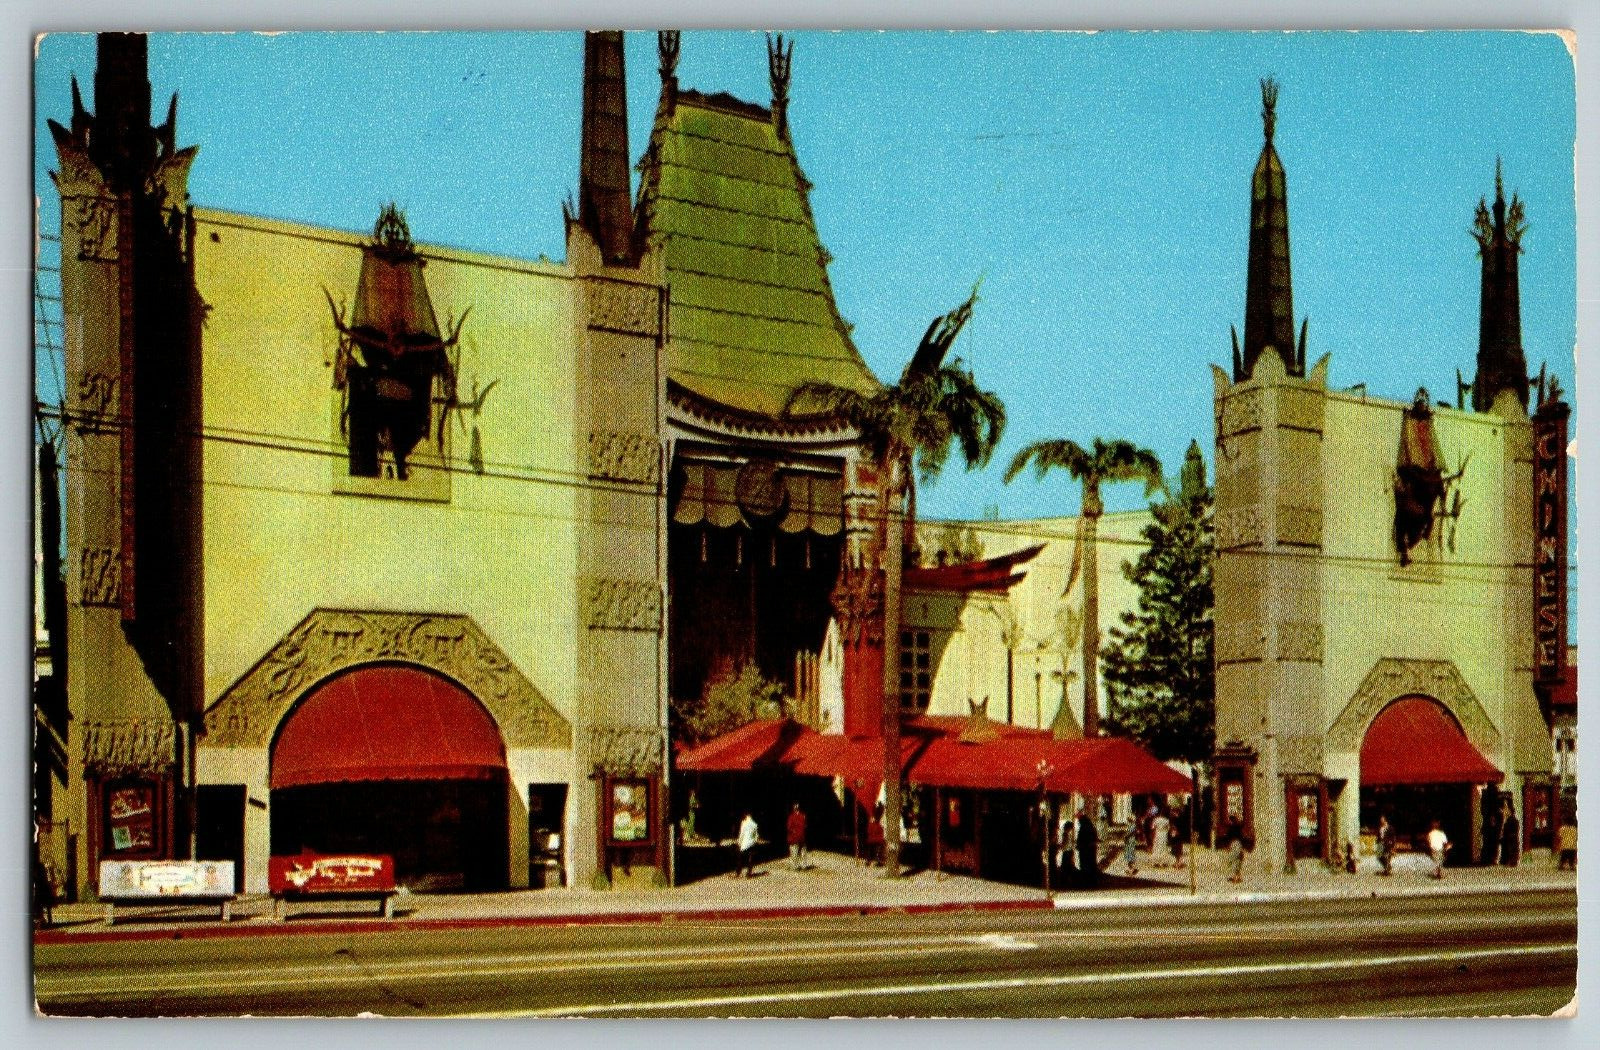 Hollywood, California - Grauman\'s Chinese Theatre - Vintage Postcard - Posted